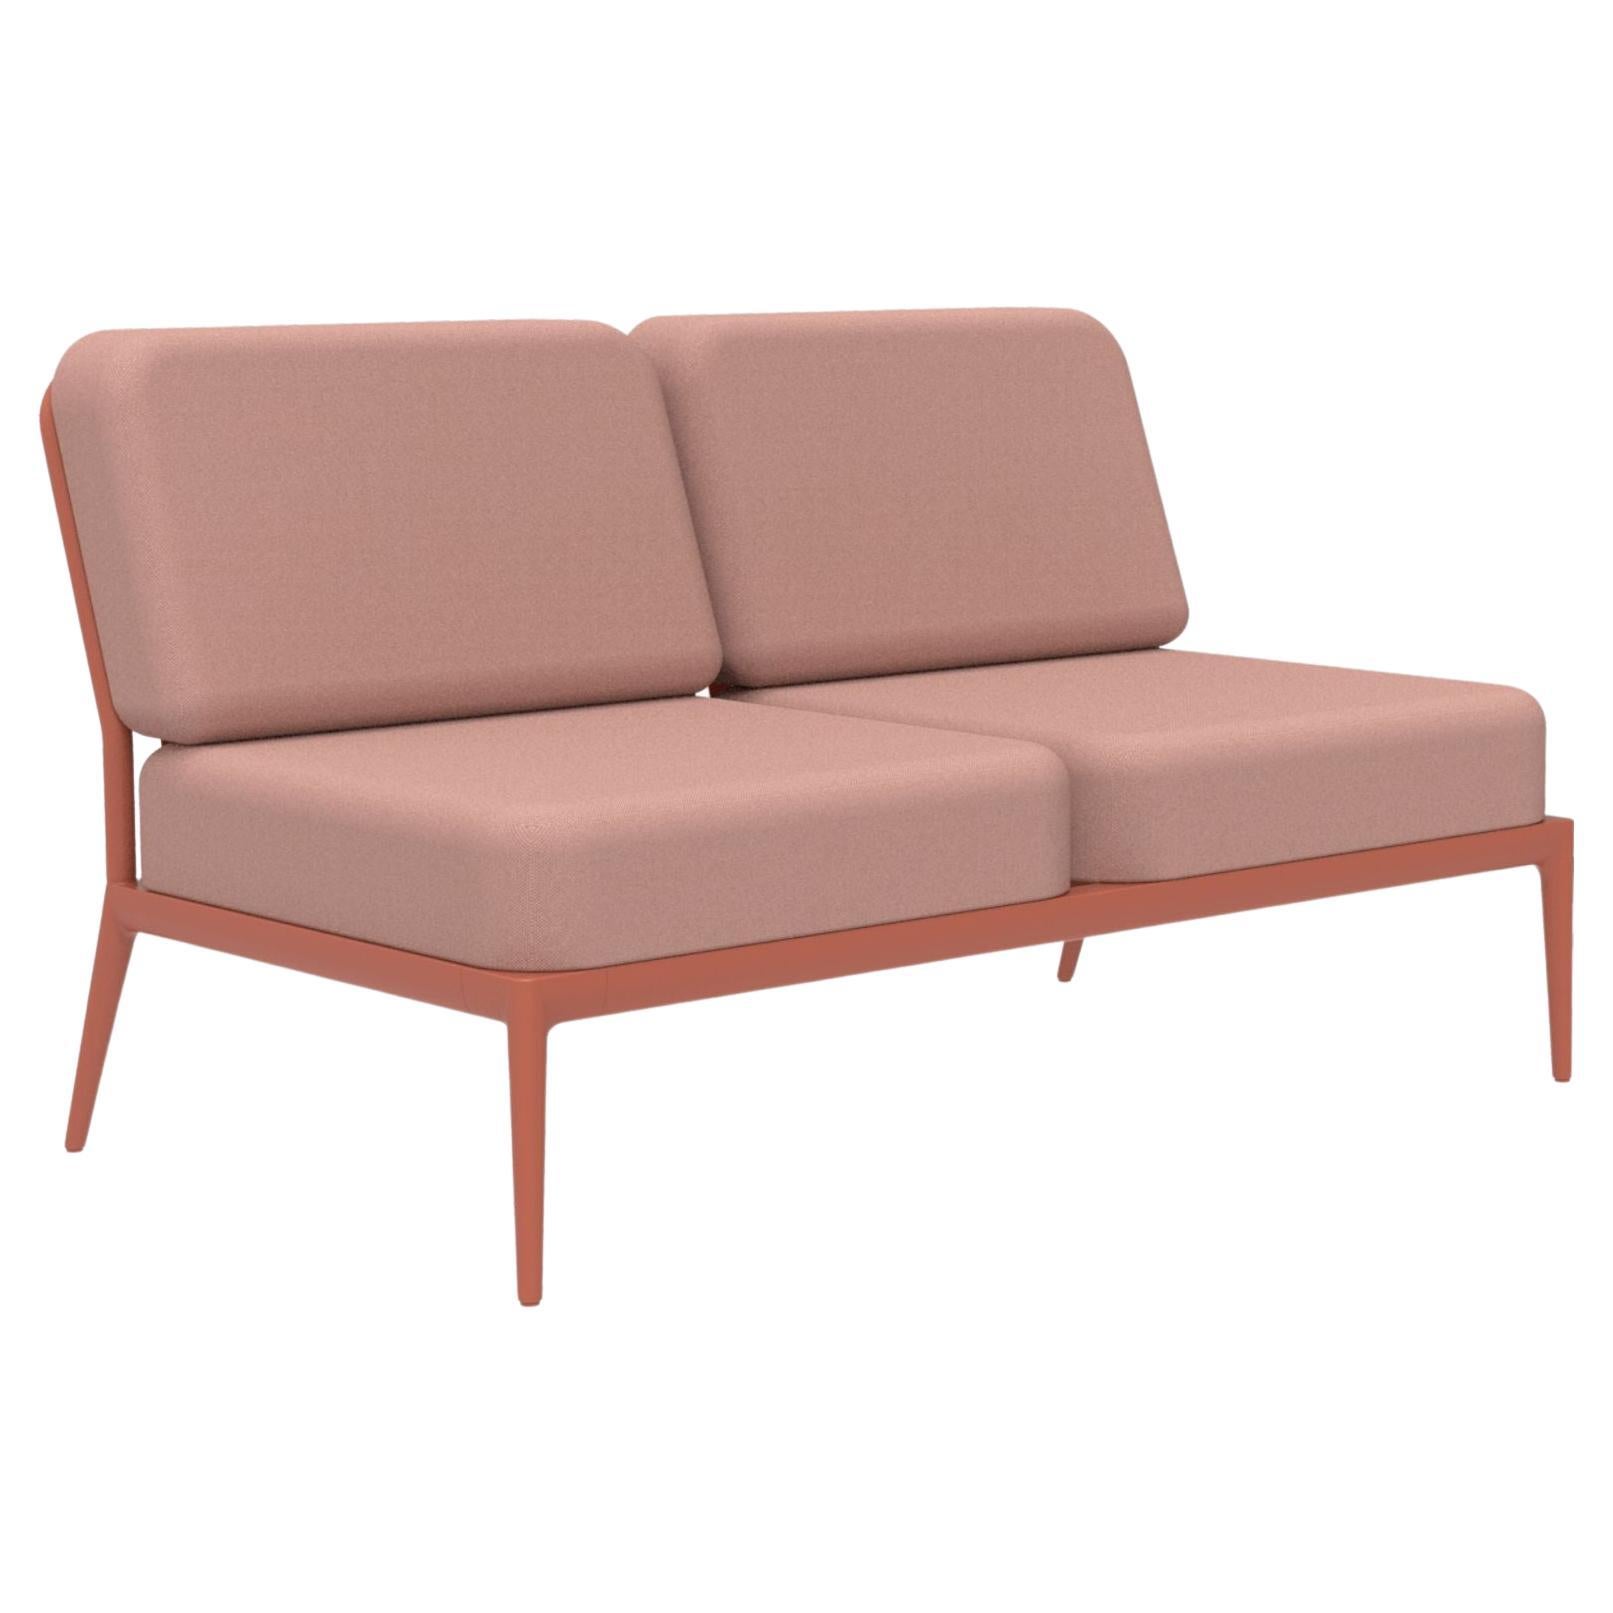 Ribbons Salmon Double Central Modular Sofa by Mowee For Sale